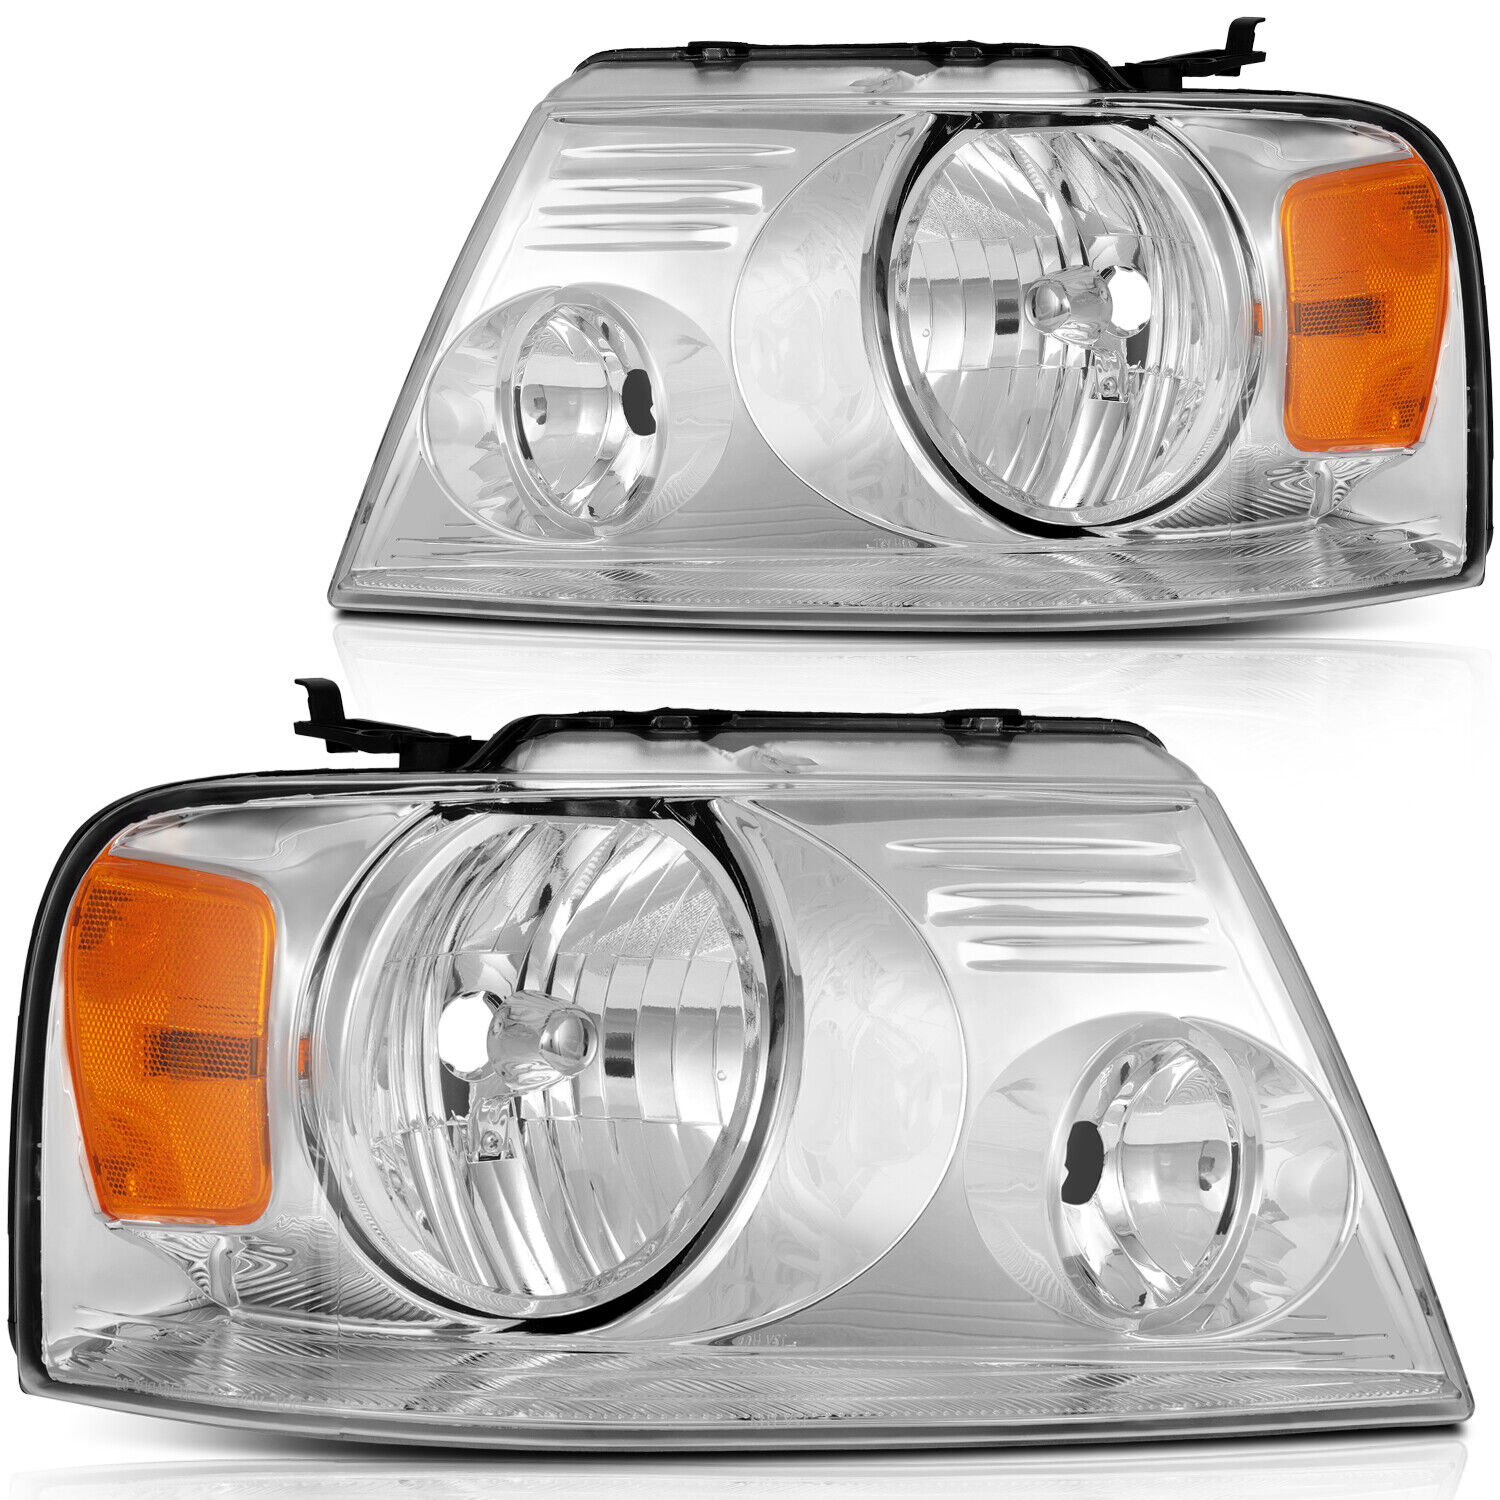 Headlights Assembly Fits 2004-08 Ford F150 Pickup 2006-2008 Lincoln Mark LT Set